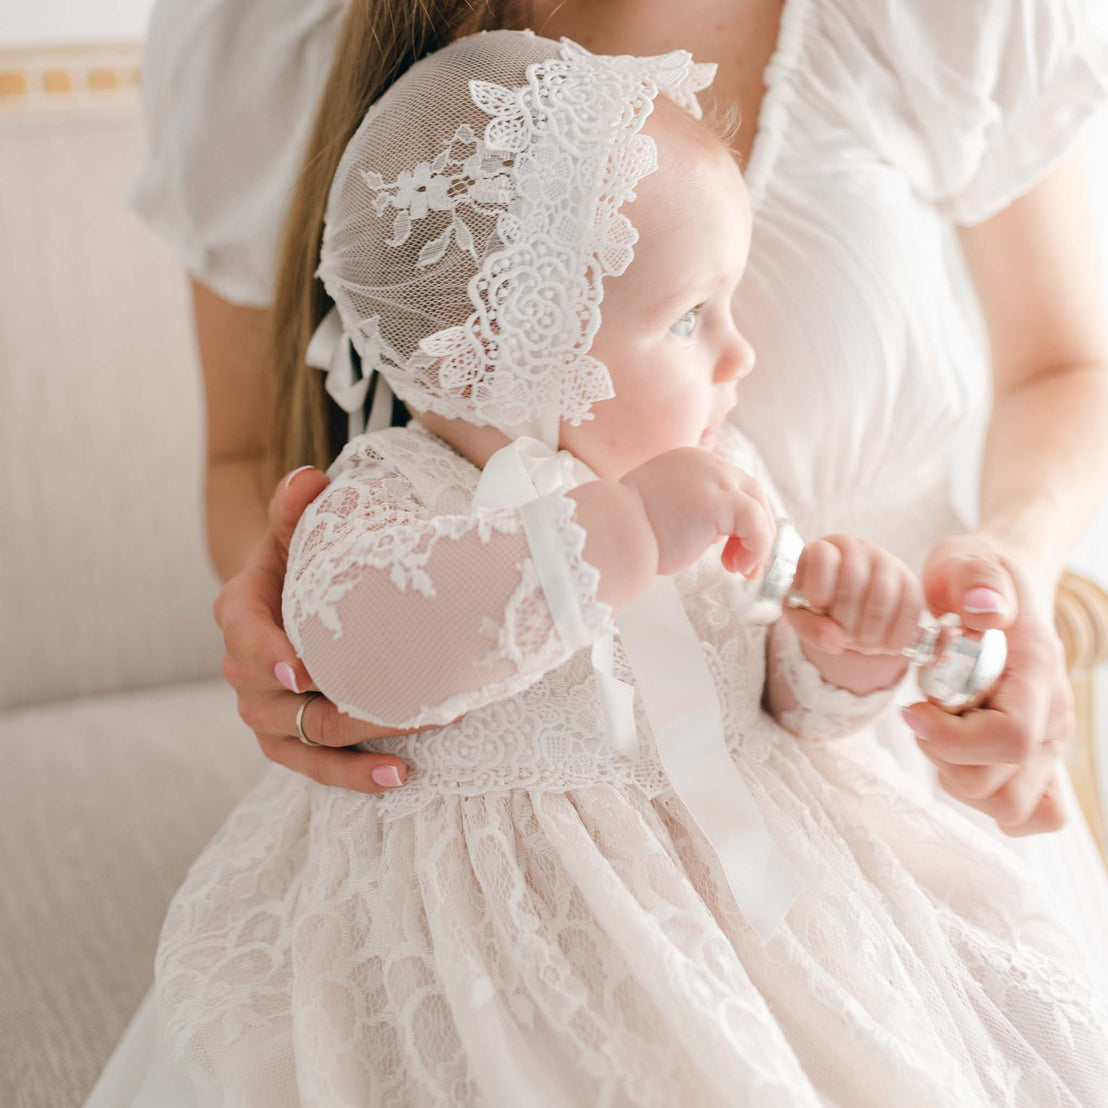 A mother tenderly holds her baby, dressed in a Juliette Romper Dress with a matching bonnet. The baby clutches a silver rattle , creating an intimate and serene moment.